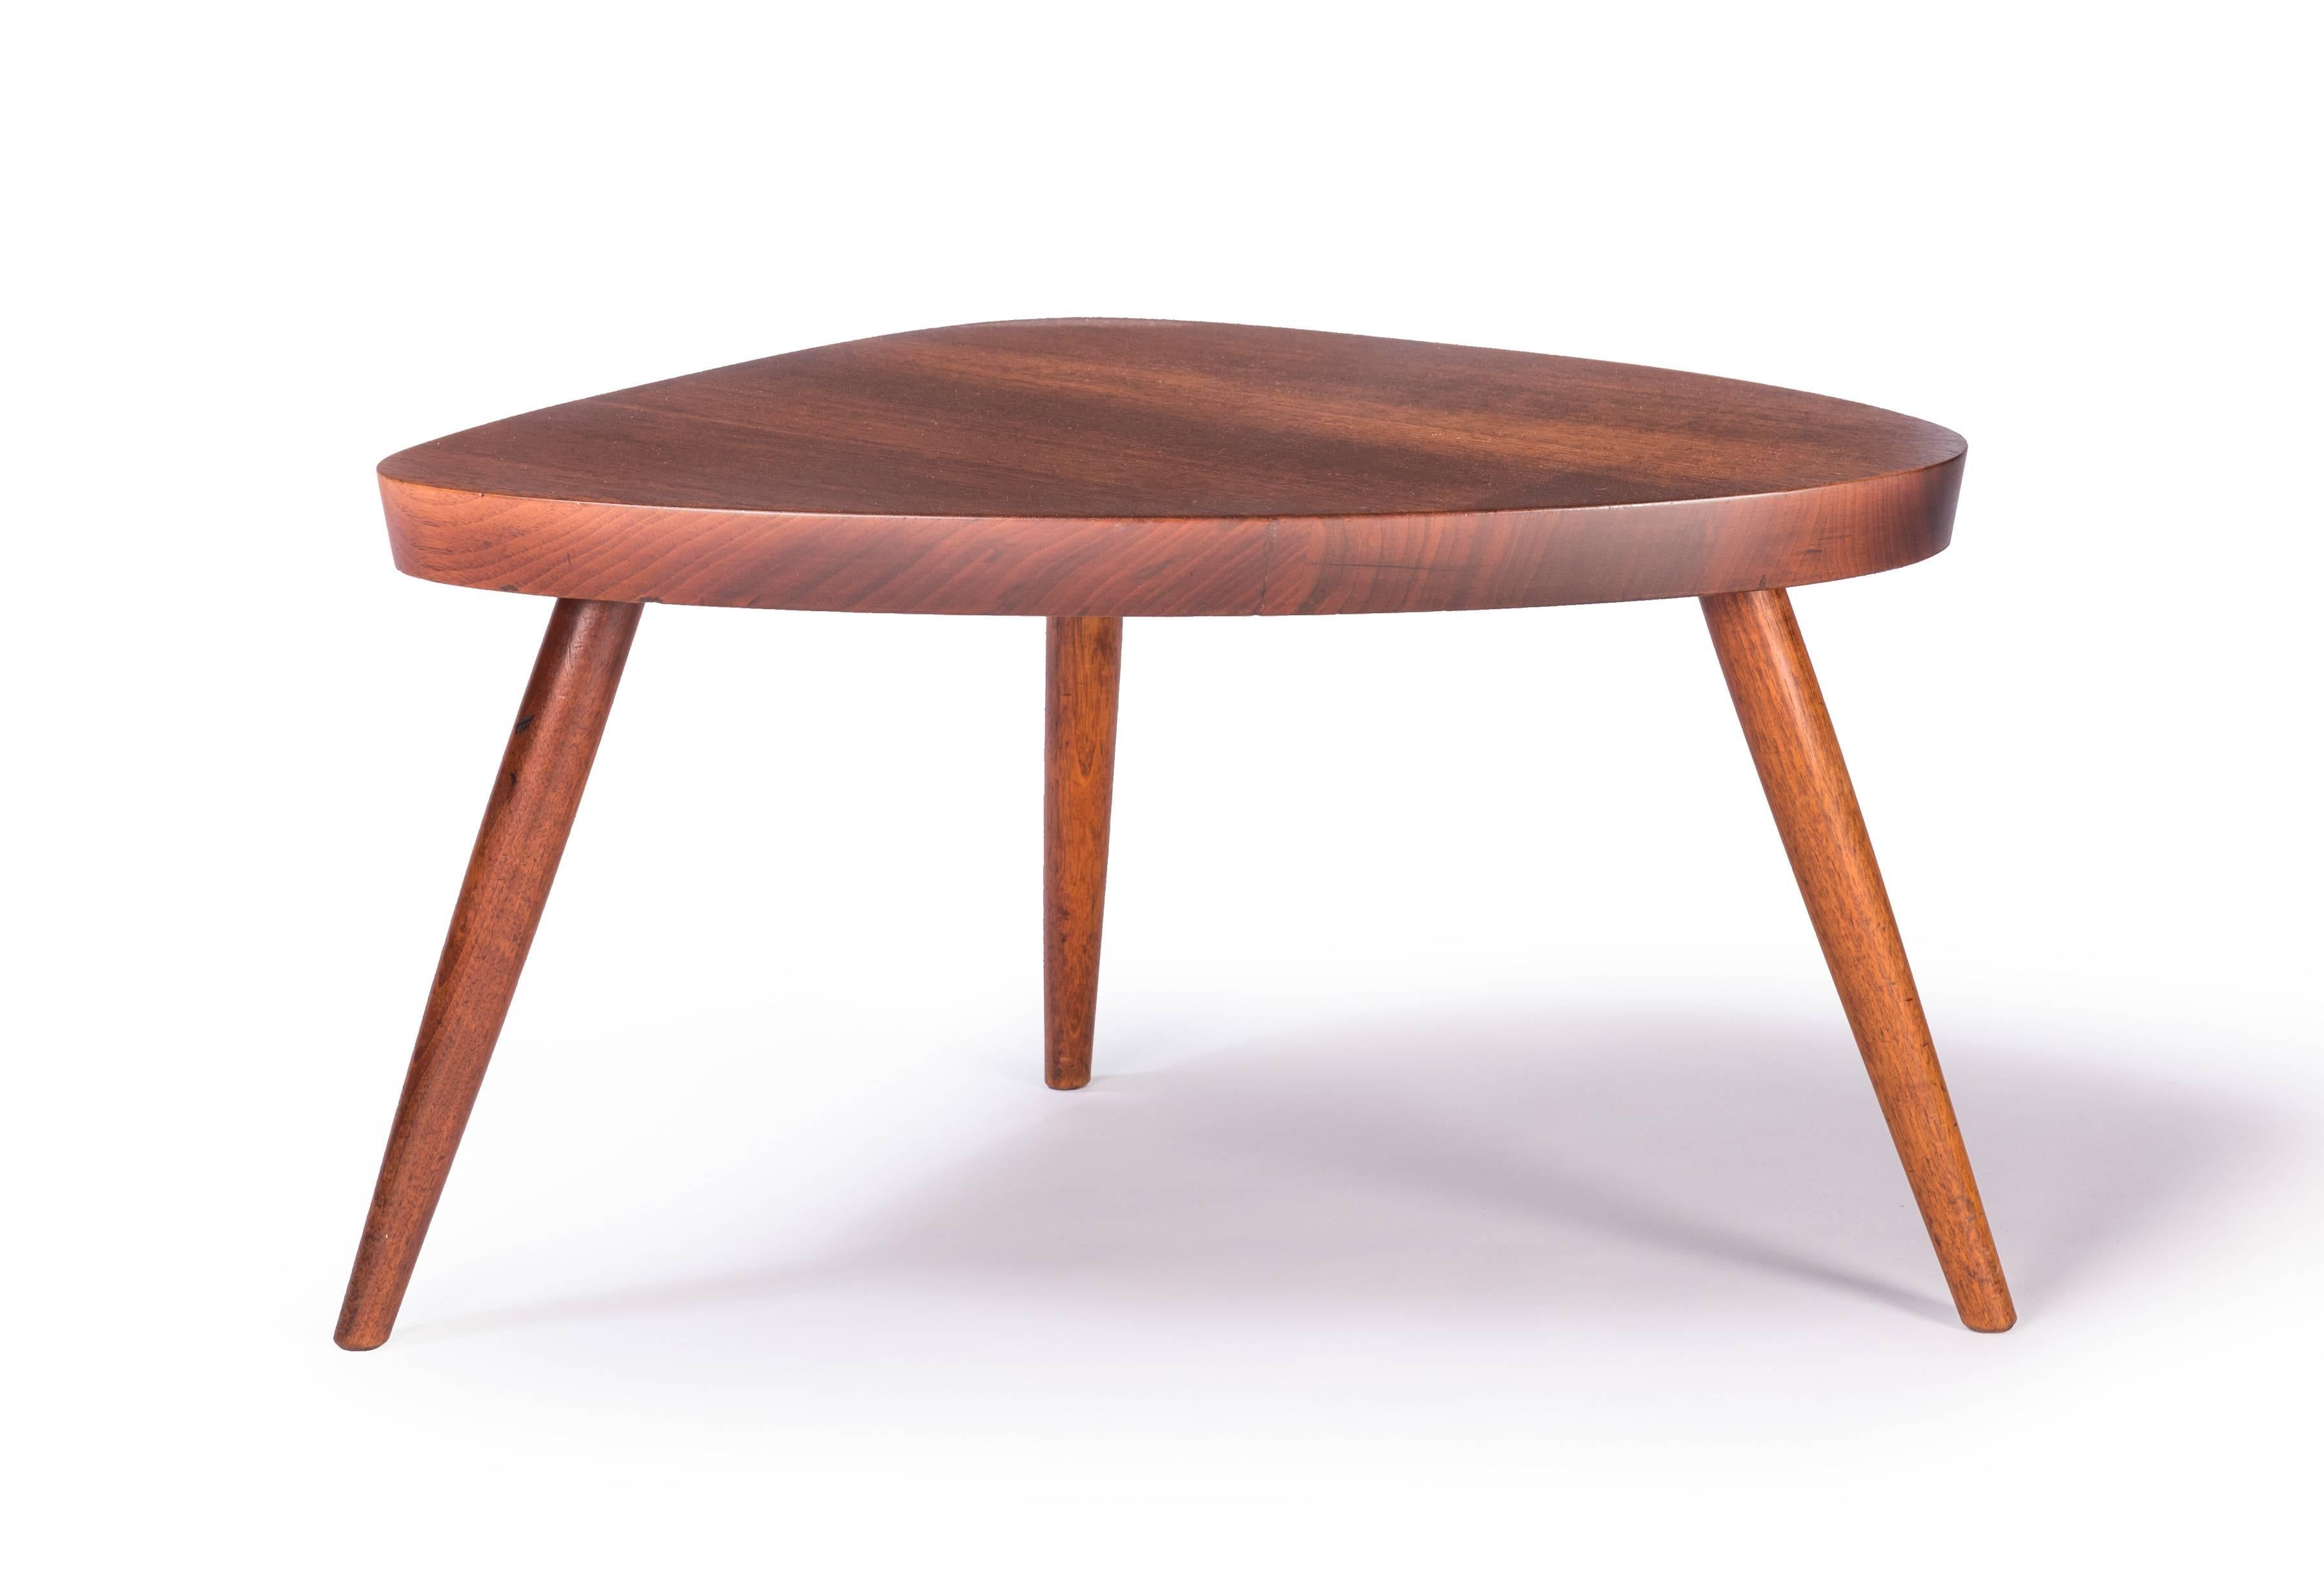 Nakashima Wepman side table with tapered legs and thick slab top in American Walnut by the leading American Studio Craft designer George Nakashima.